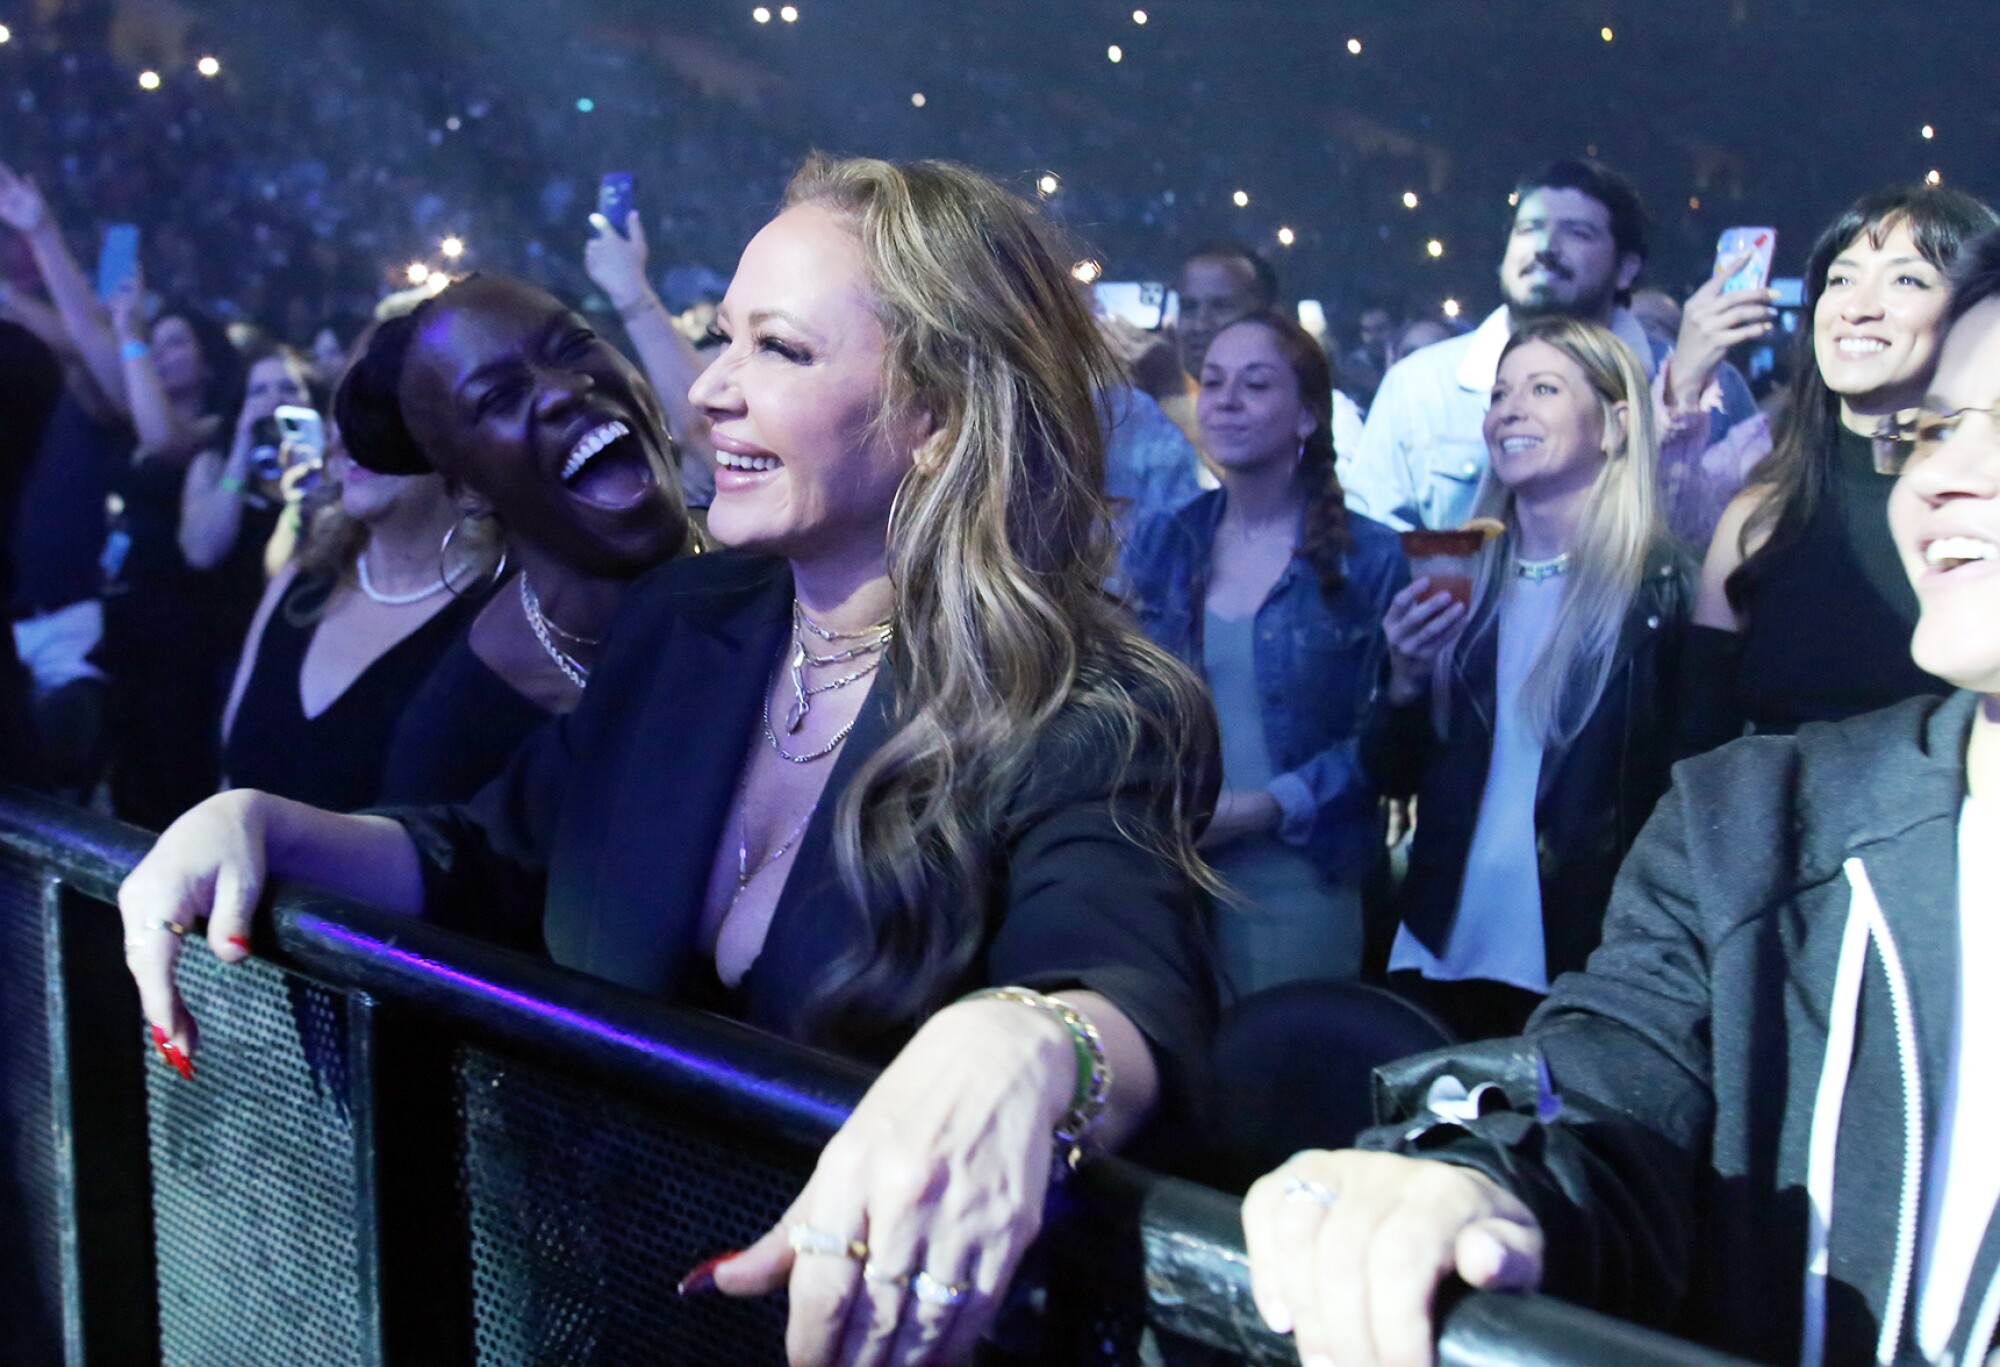 Actress Leah Remini is all smiles as she watches Marc Anthony.